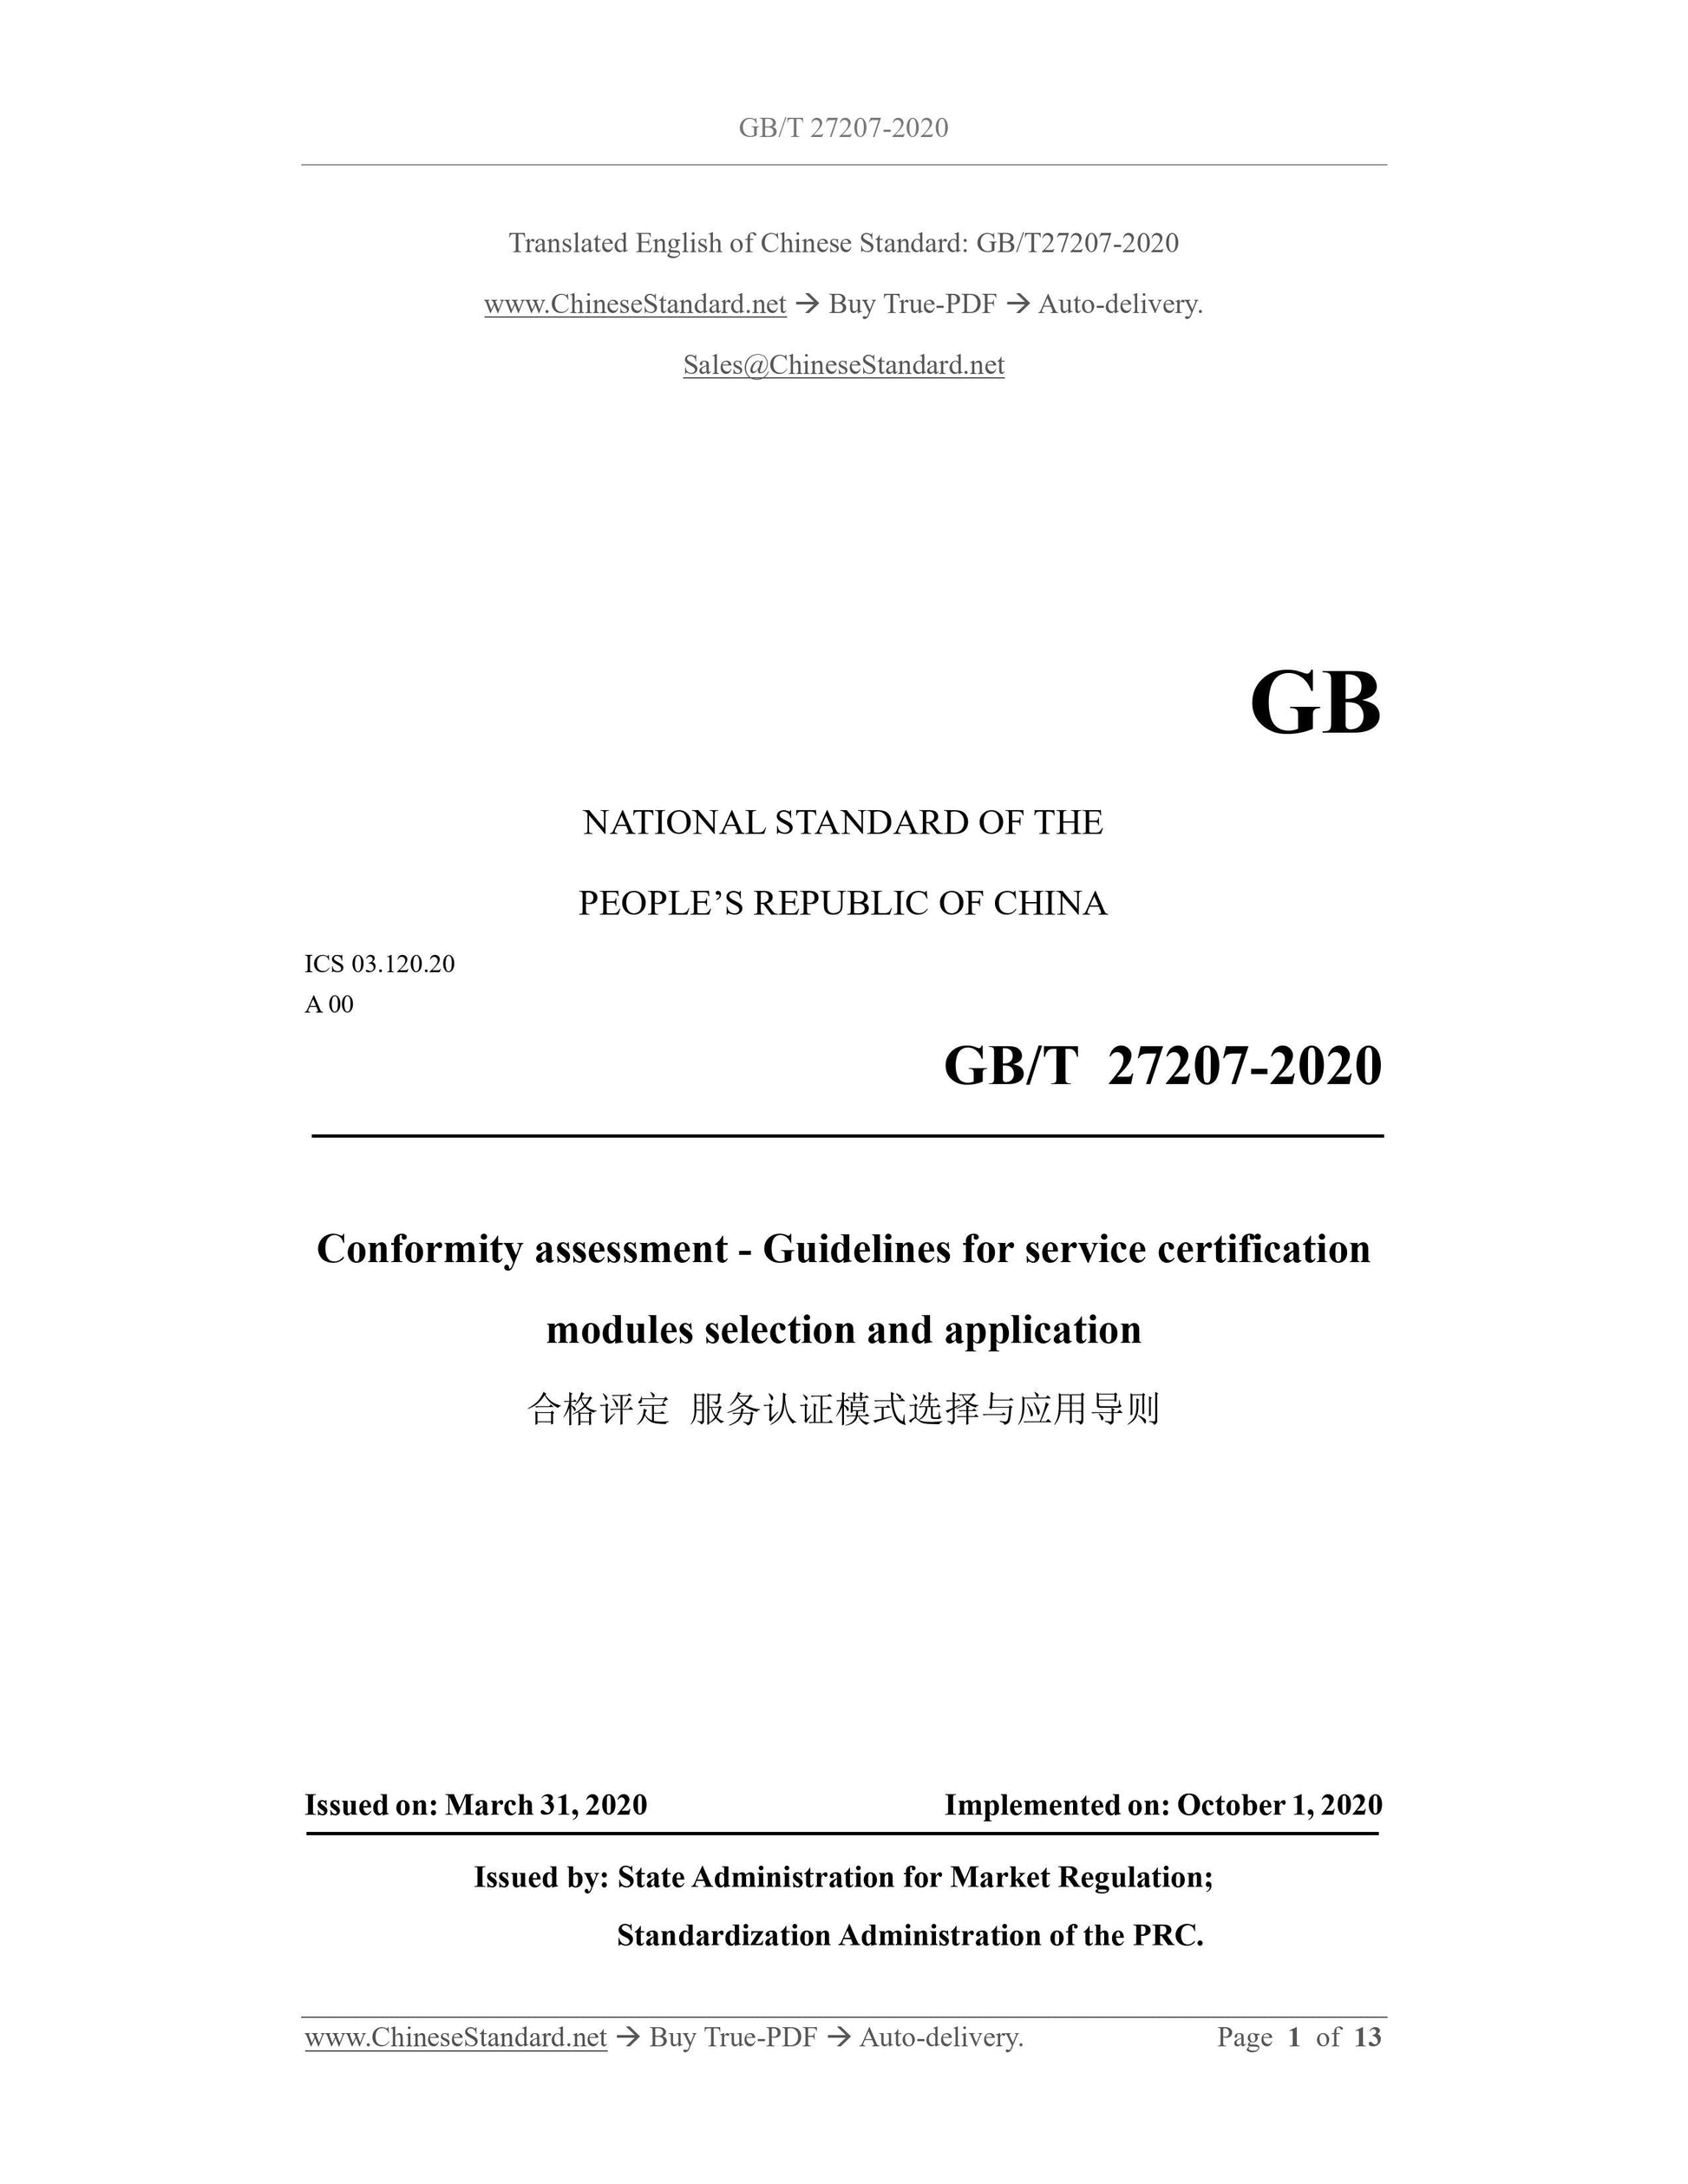 GB/T 27207-2020 Page 1